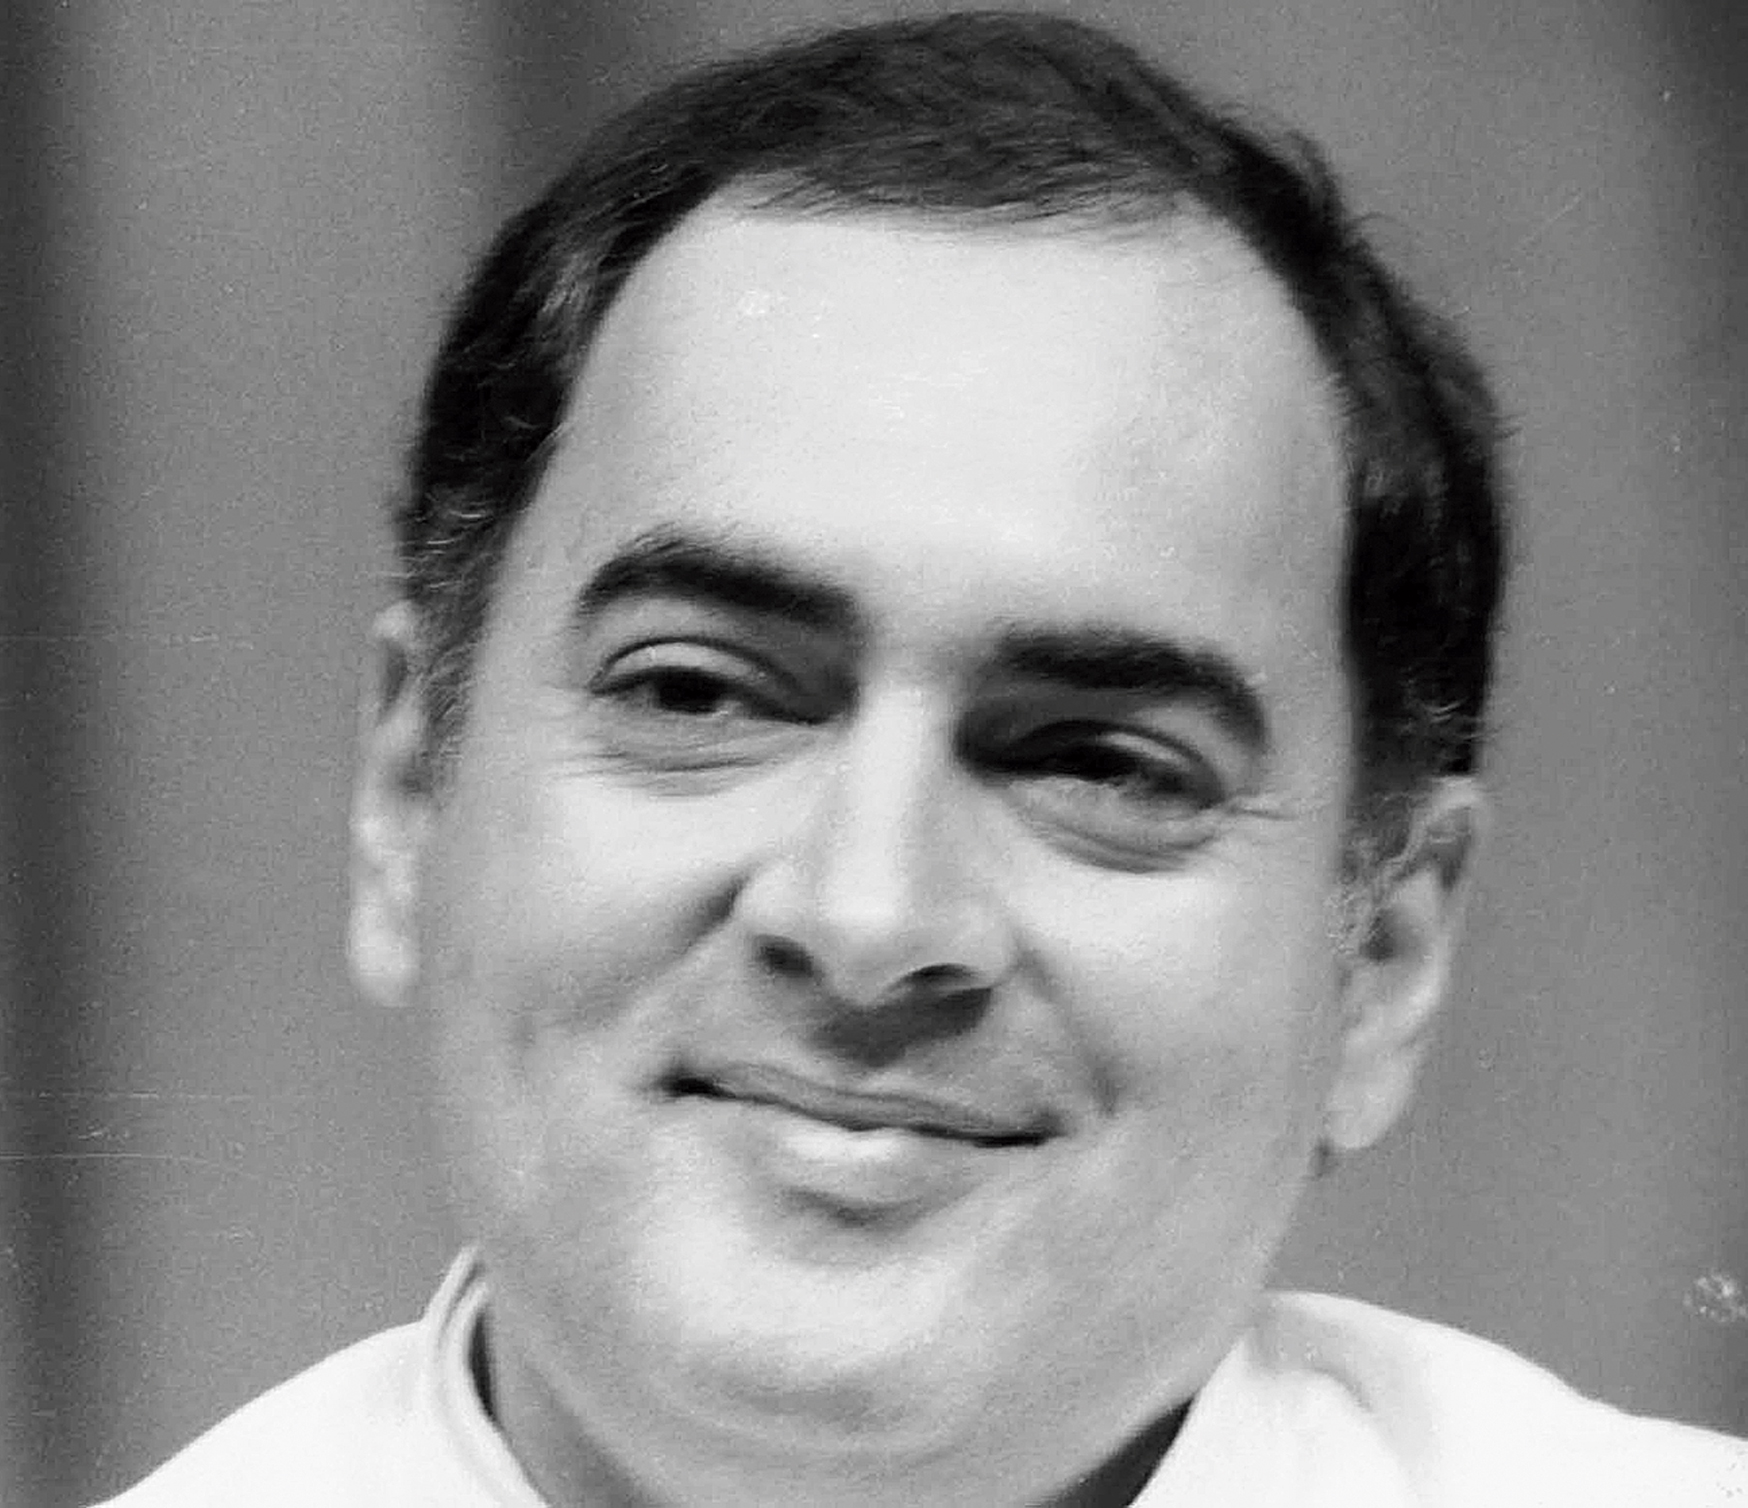 Rajiv Gandhi in 1985 when he was Prime Minister. 